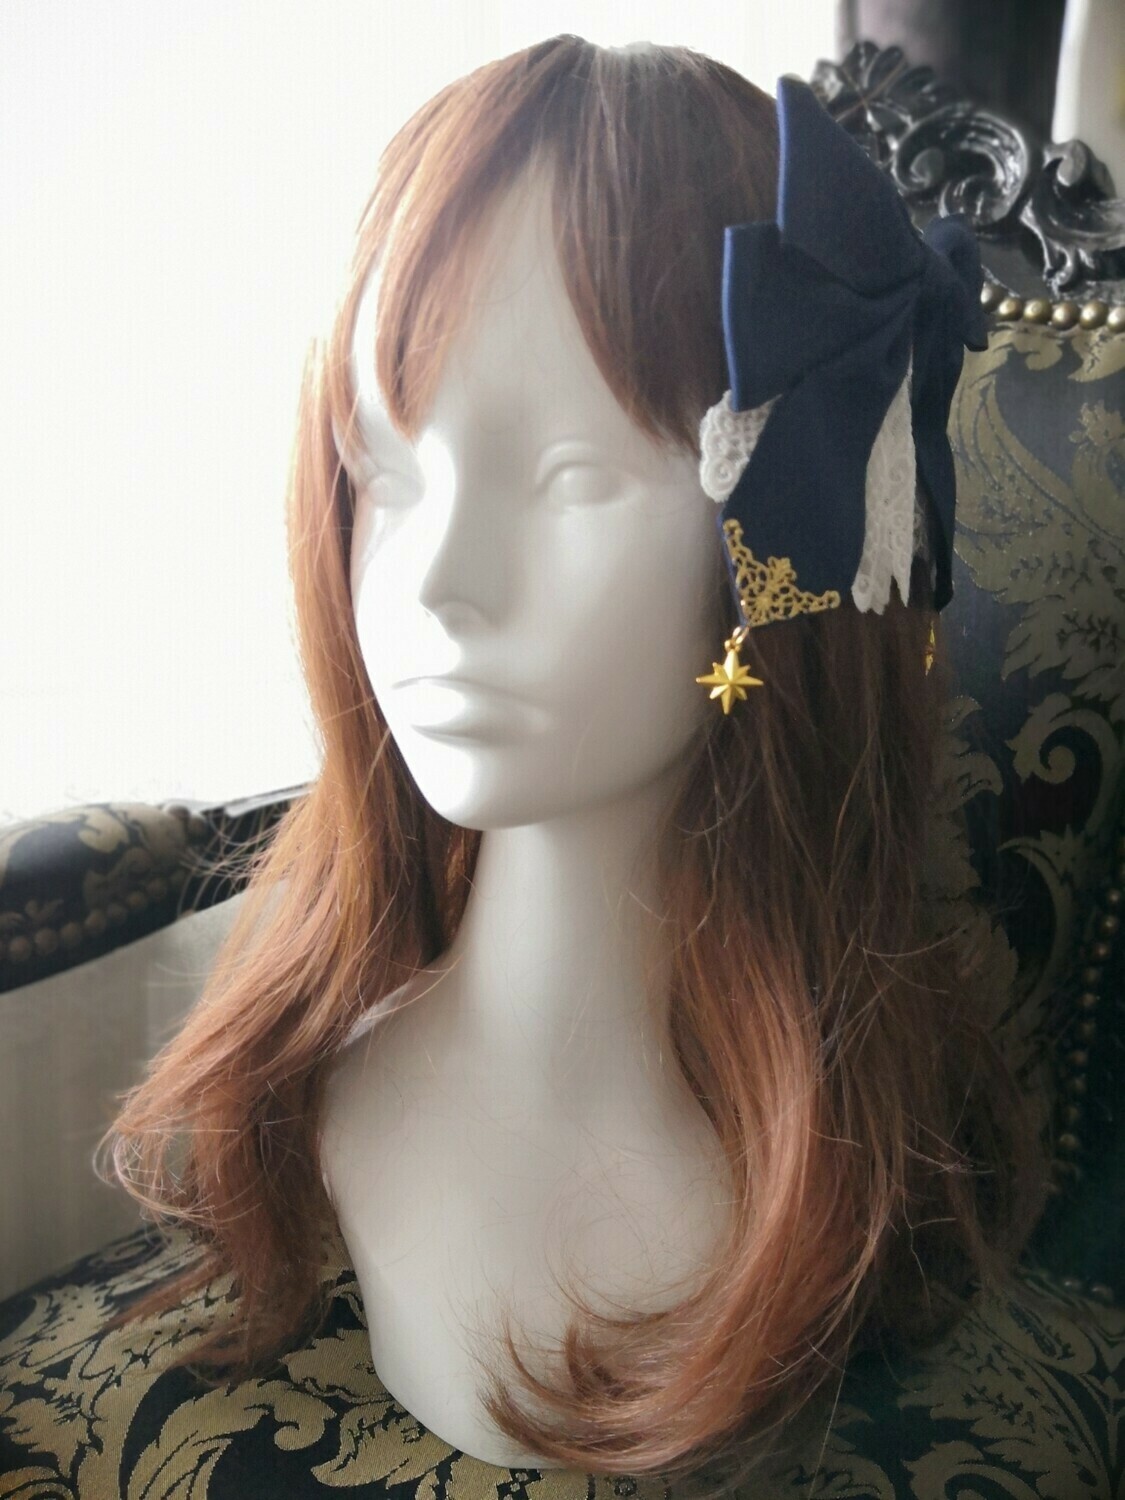 Ribbon hair accessory with star